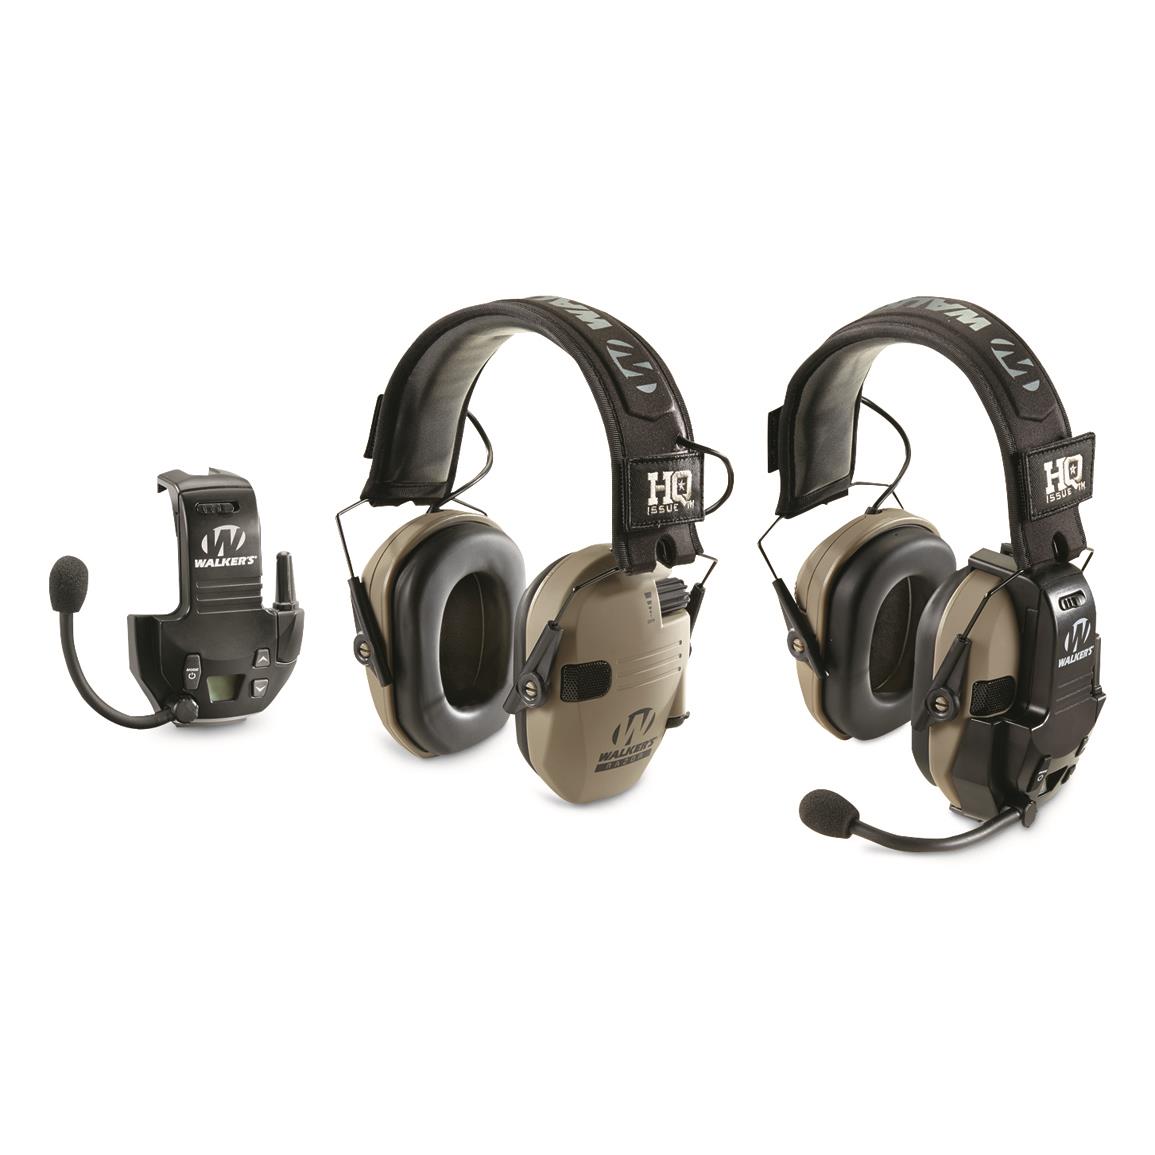 HQ ISSUE Walker's Razor Electronic Ear Muffs with Walkie Talkie, 2 Pack -  714323, Hearing Protection at Sportsman's Guide